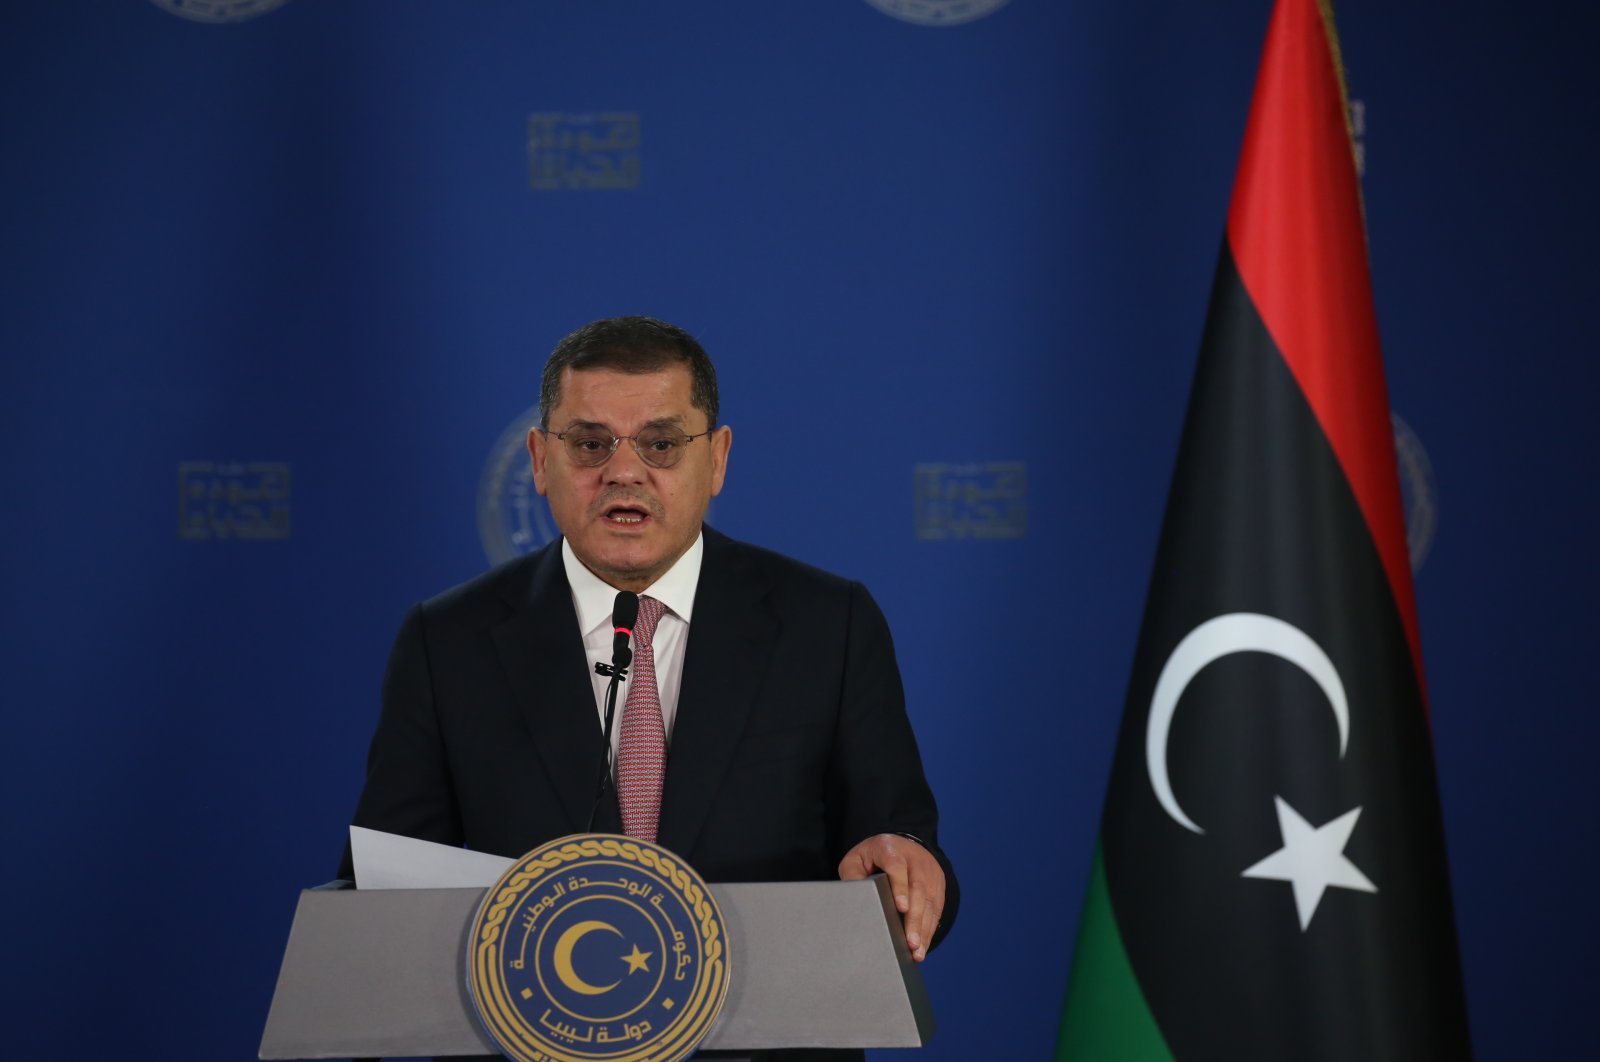 Interim Prime Minister Abdul Hamid Dbeibah speaks at a news conference in Tripoli, Libya, Feb. 14, 2022. (AA Photo)